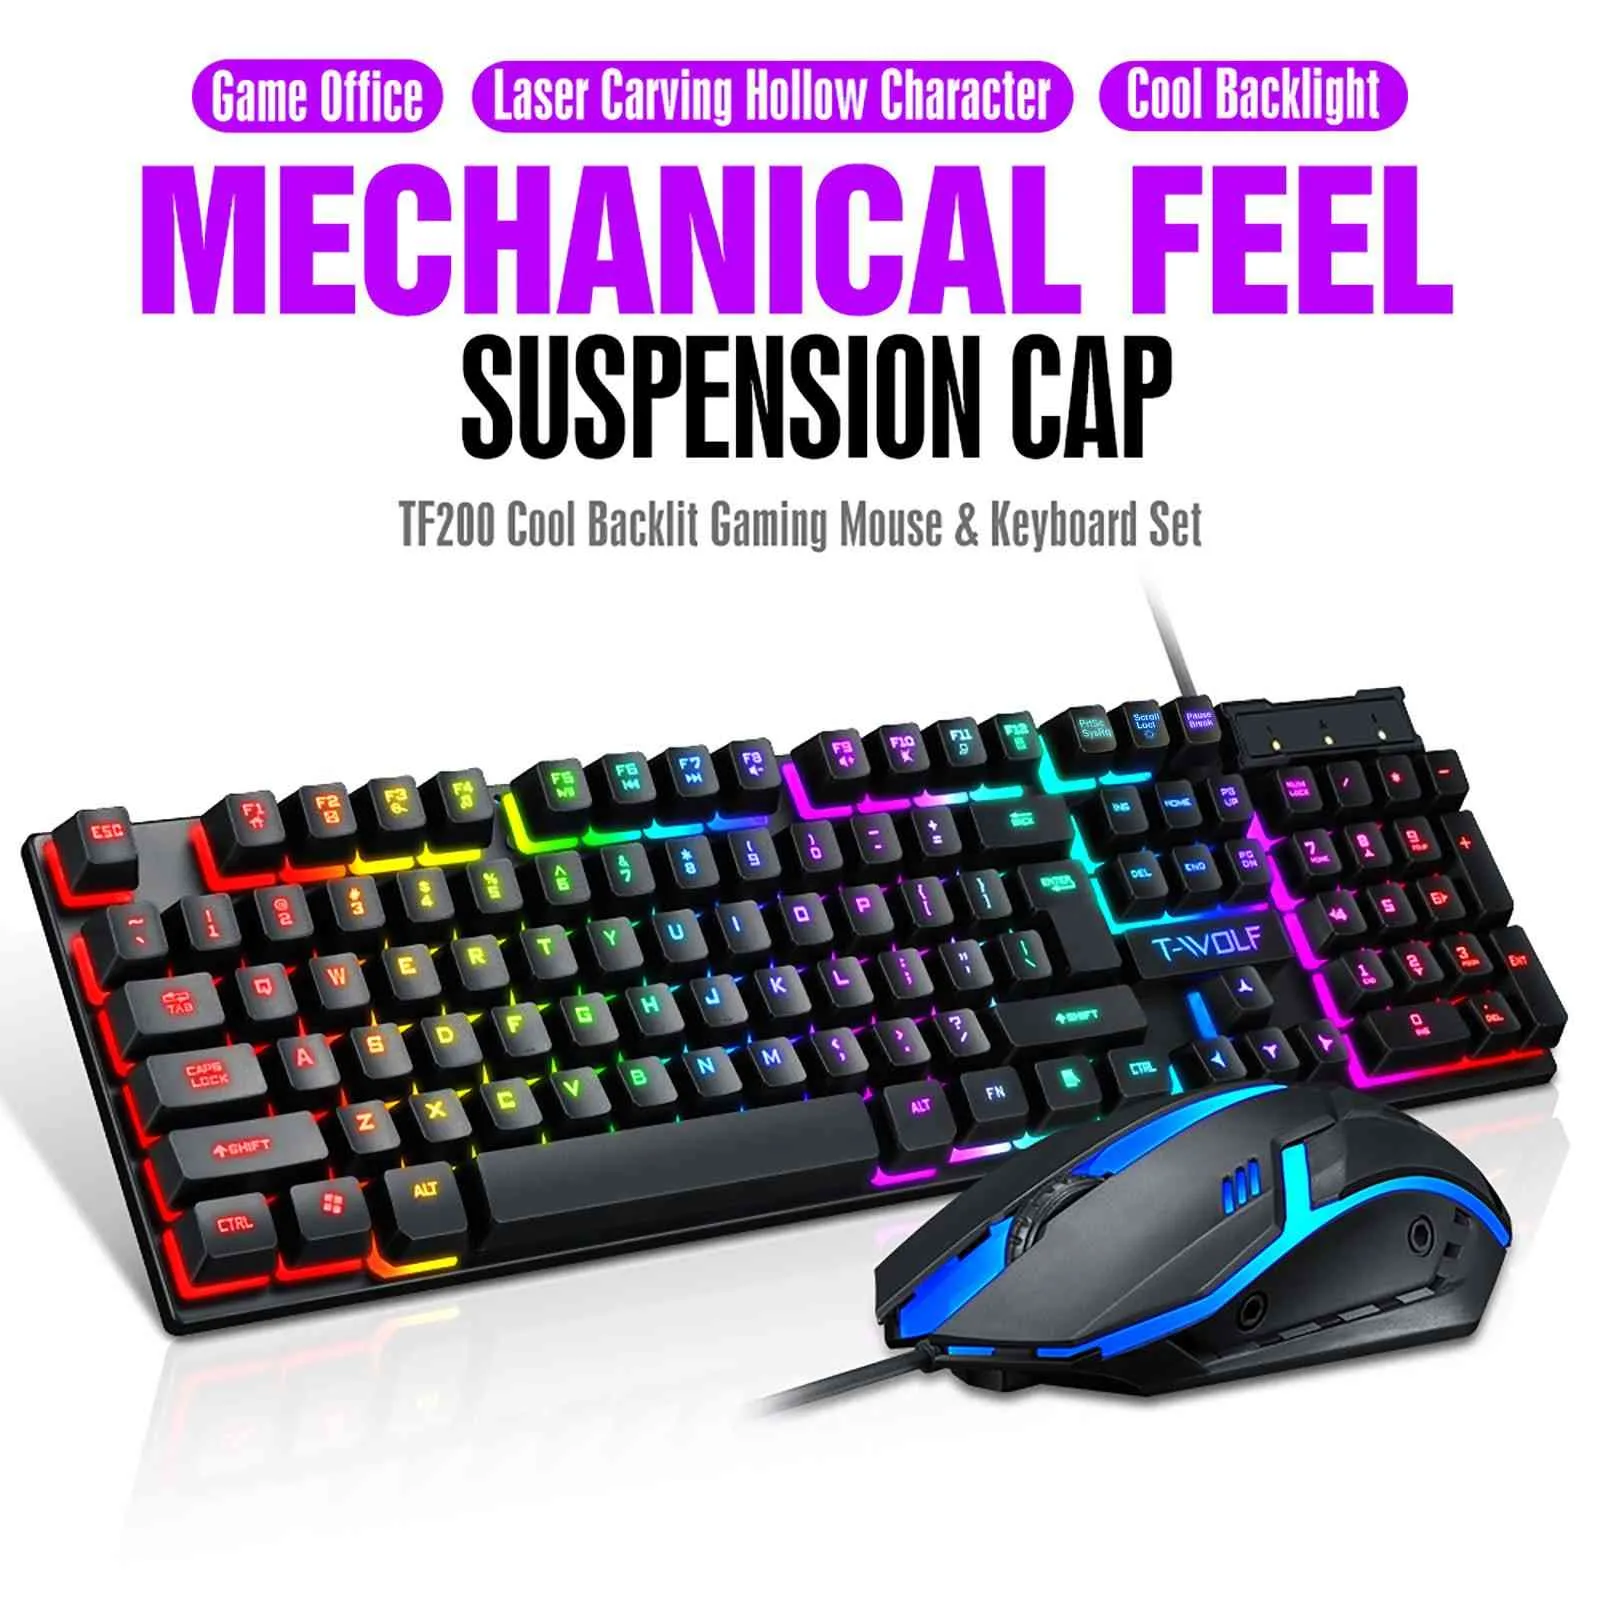 Set Rainbow Backlight Usb 2400DPI Gaming 104Key Wired keyboard Mouse Gamer Laptop PC Games